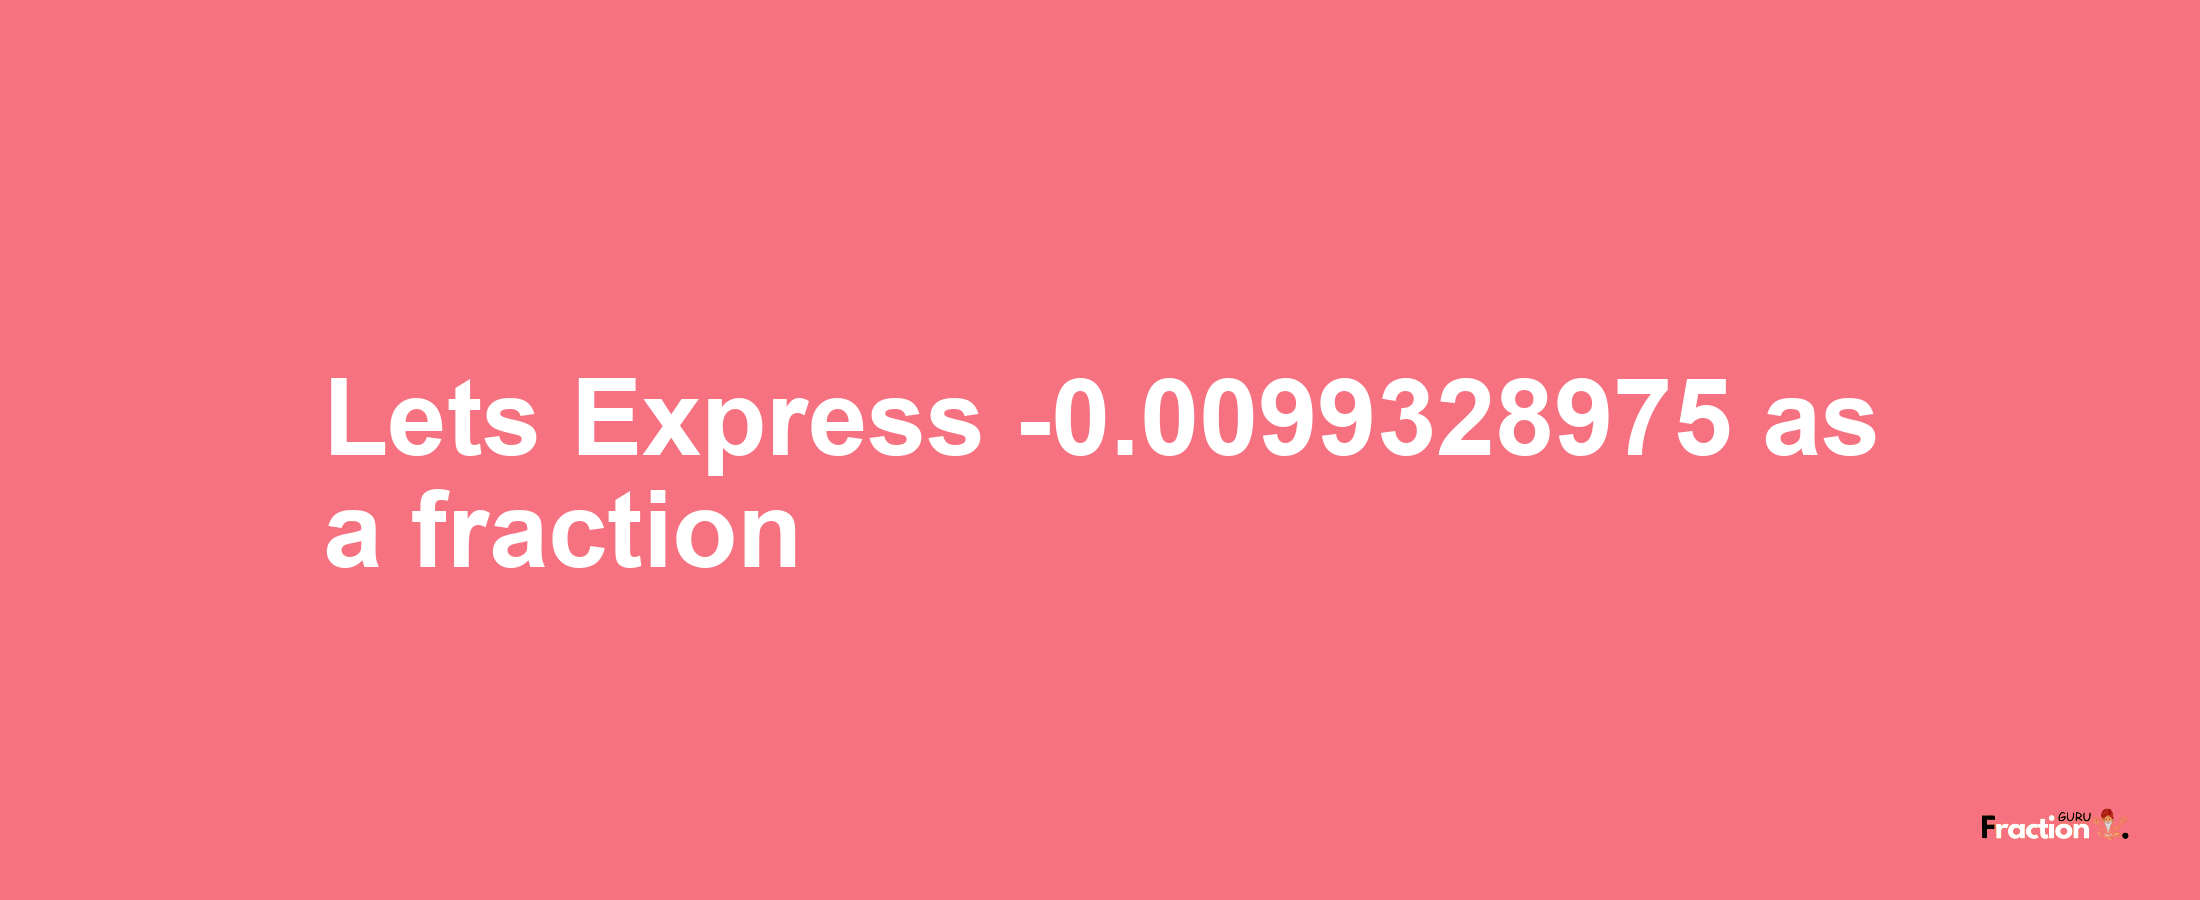 Lets Express -0.0099328975 as afraction